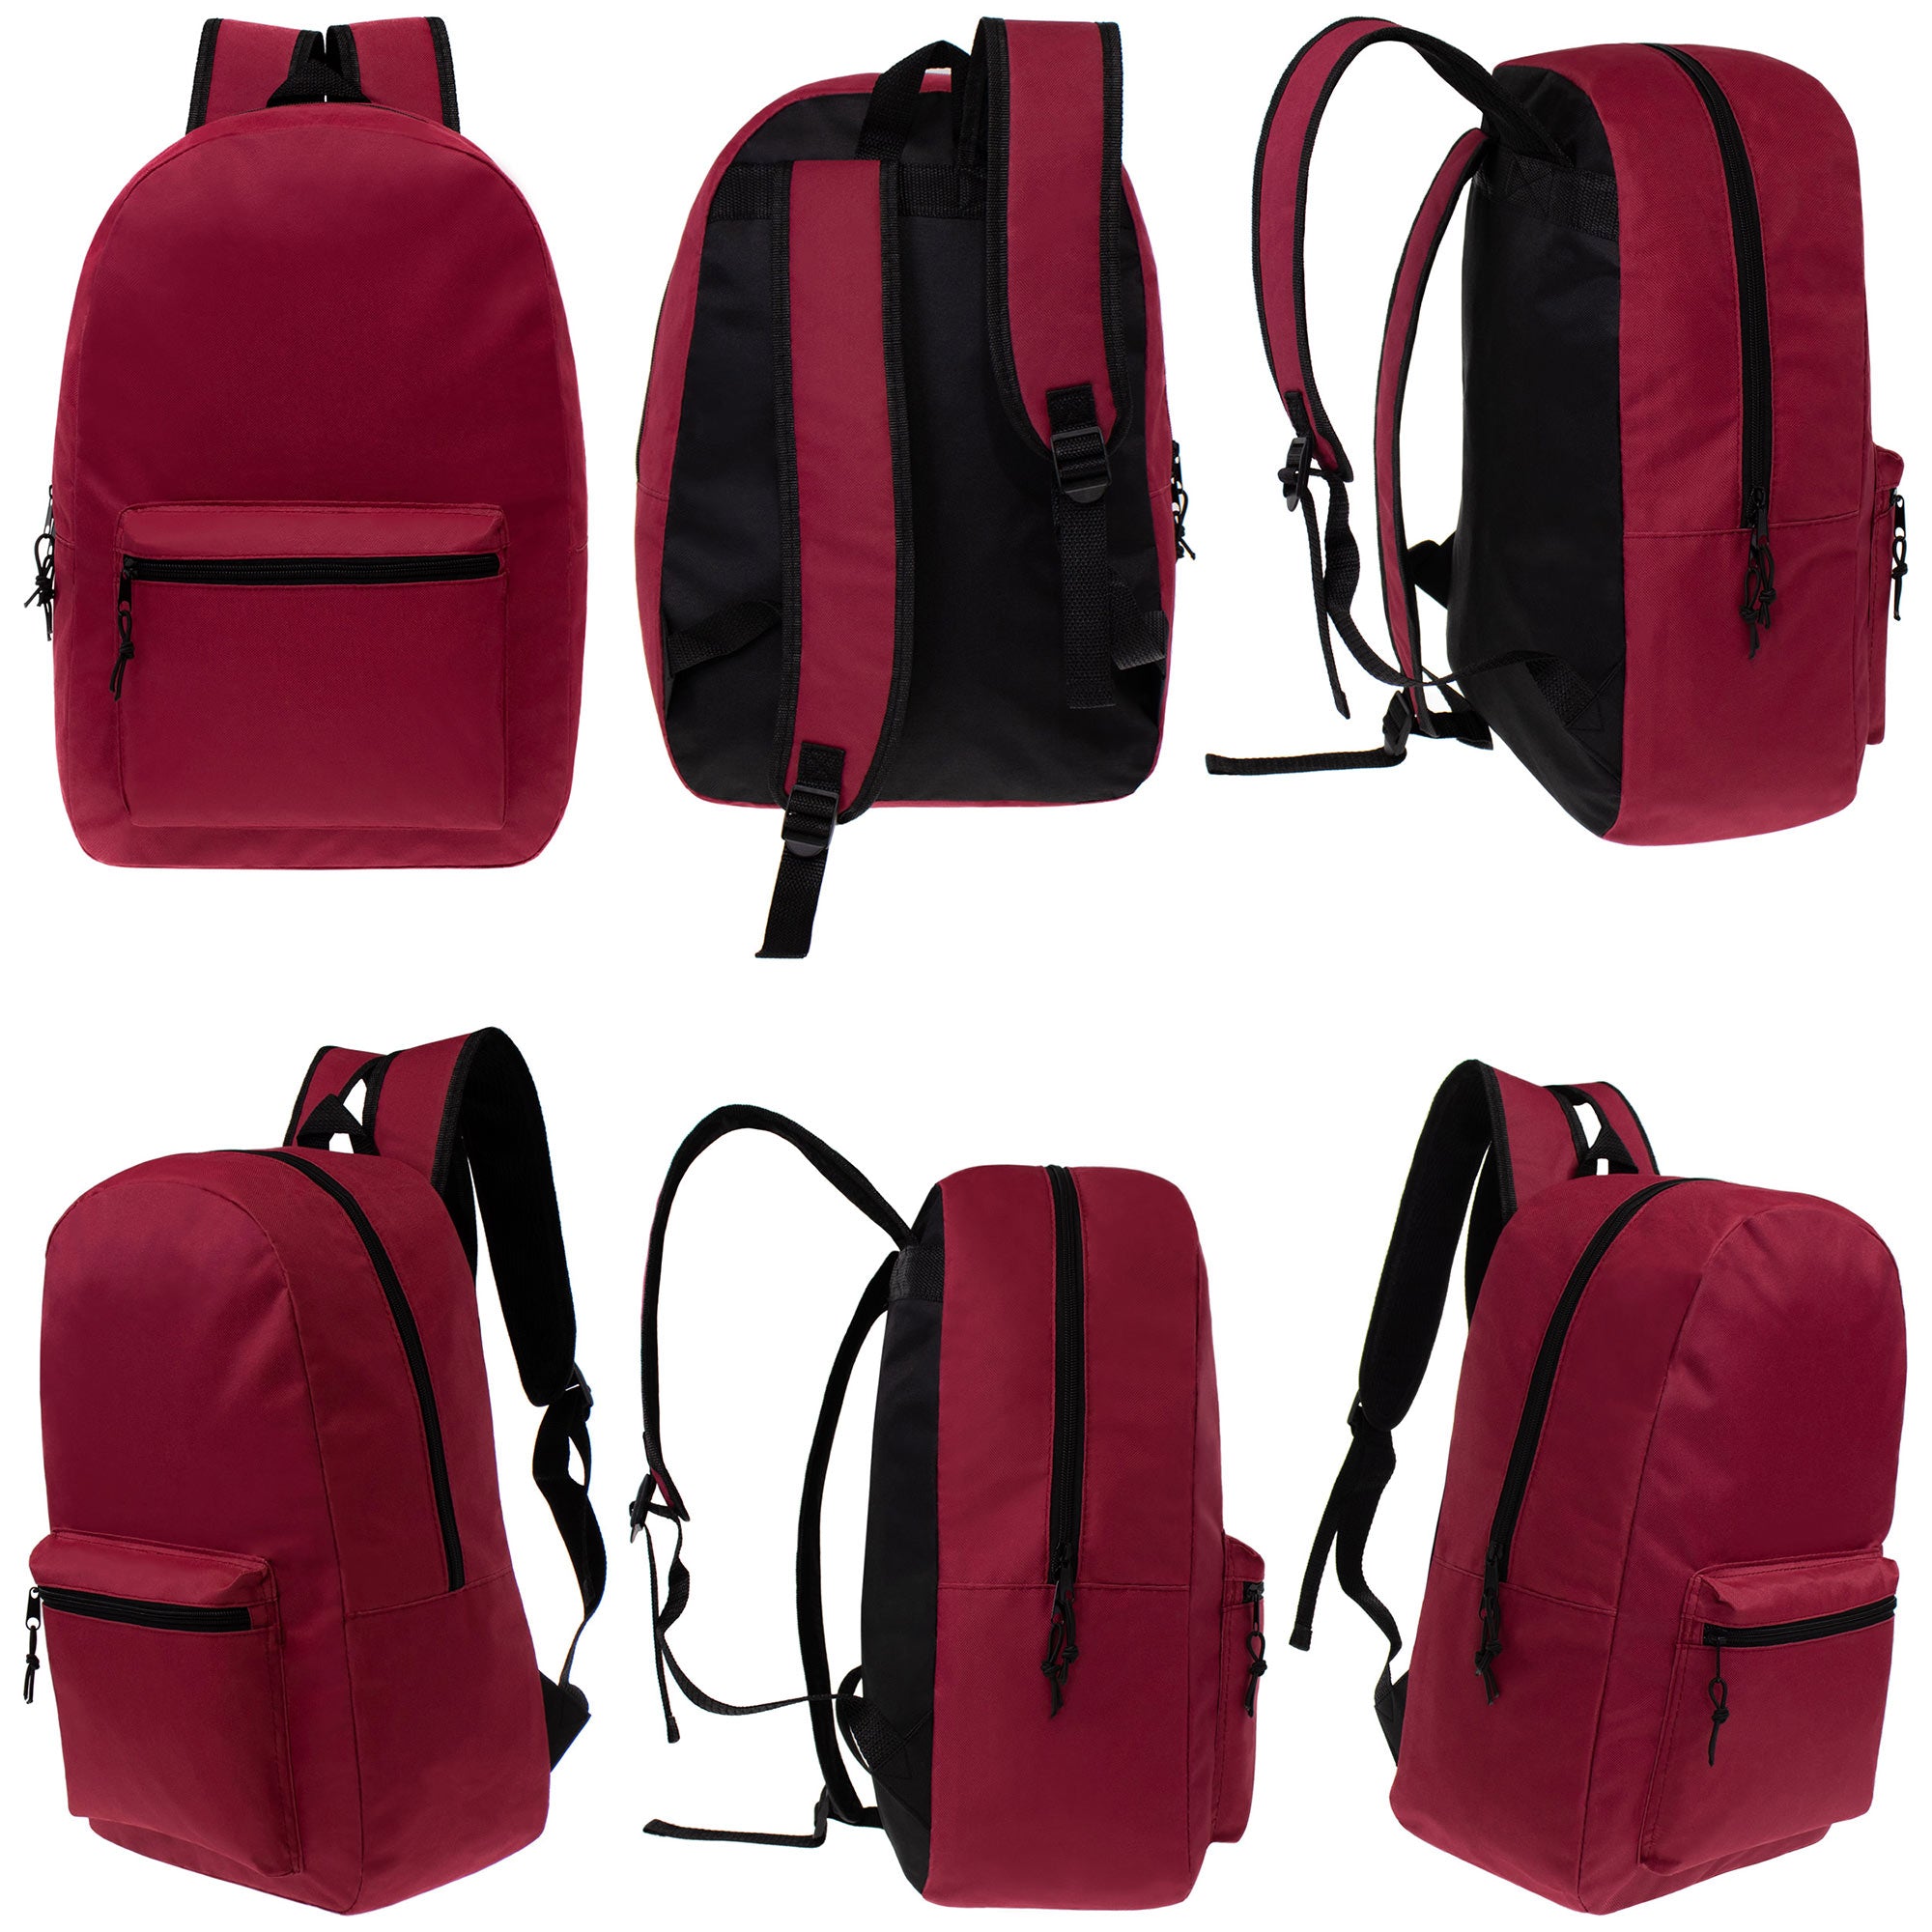 24 pack of backpacks 12 colors wholesale price